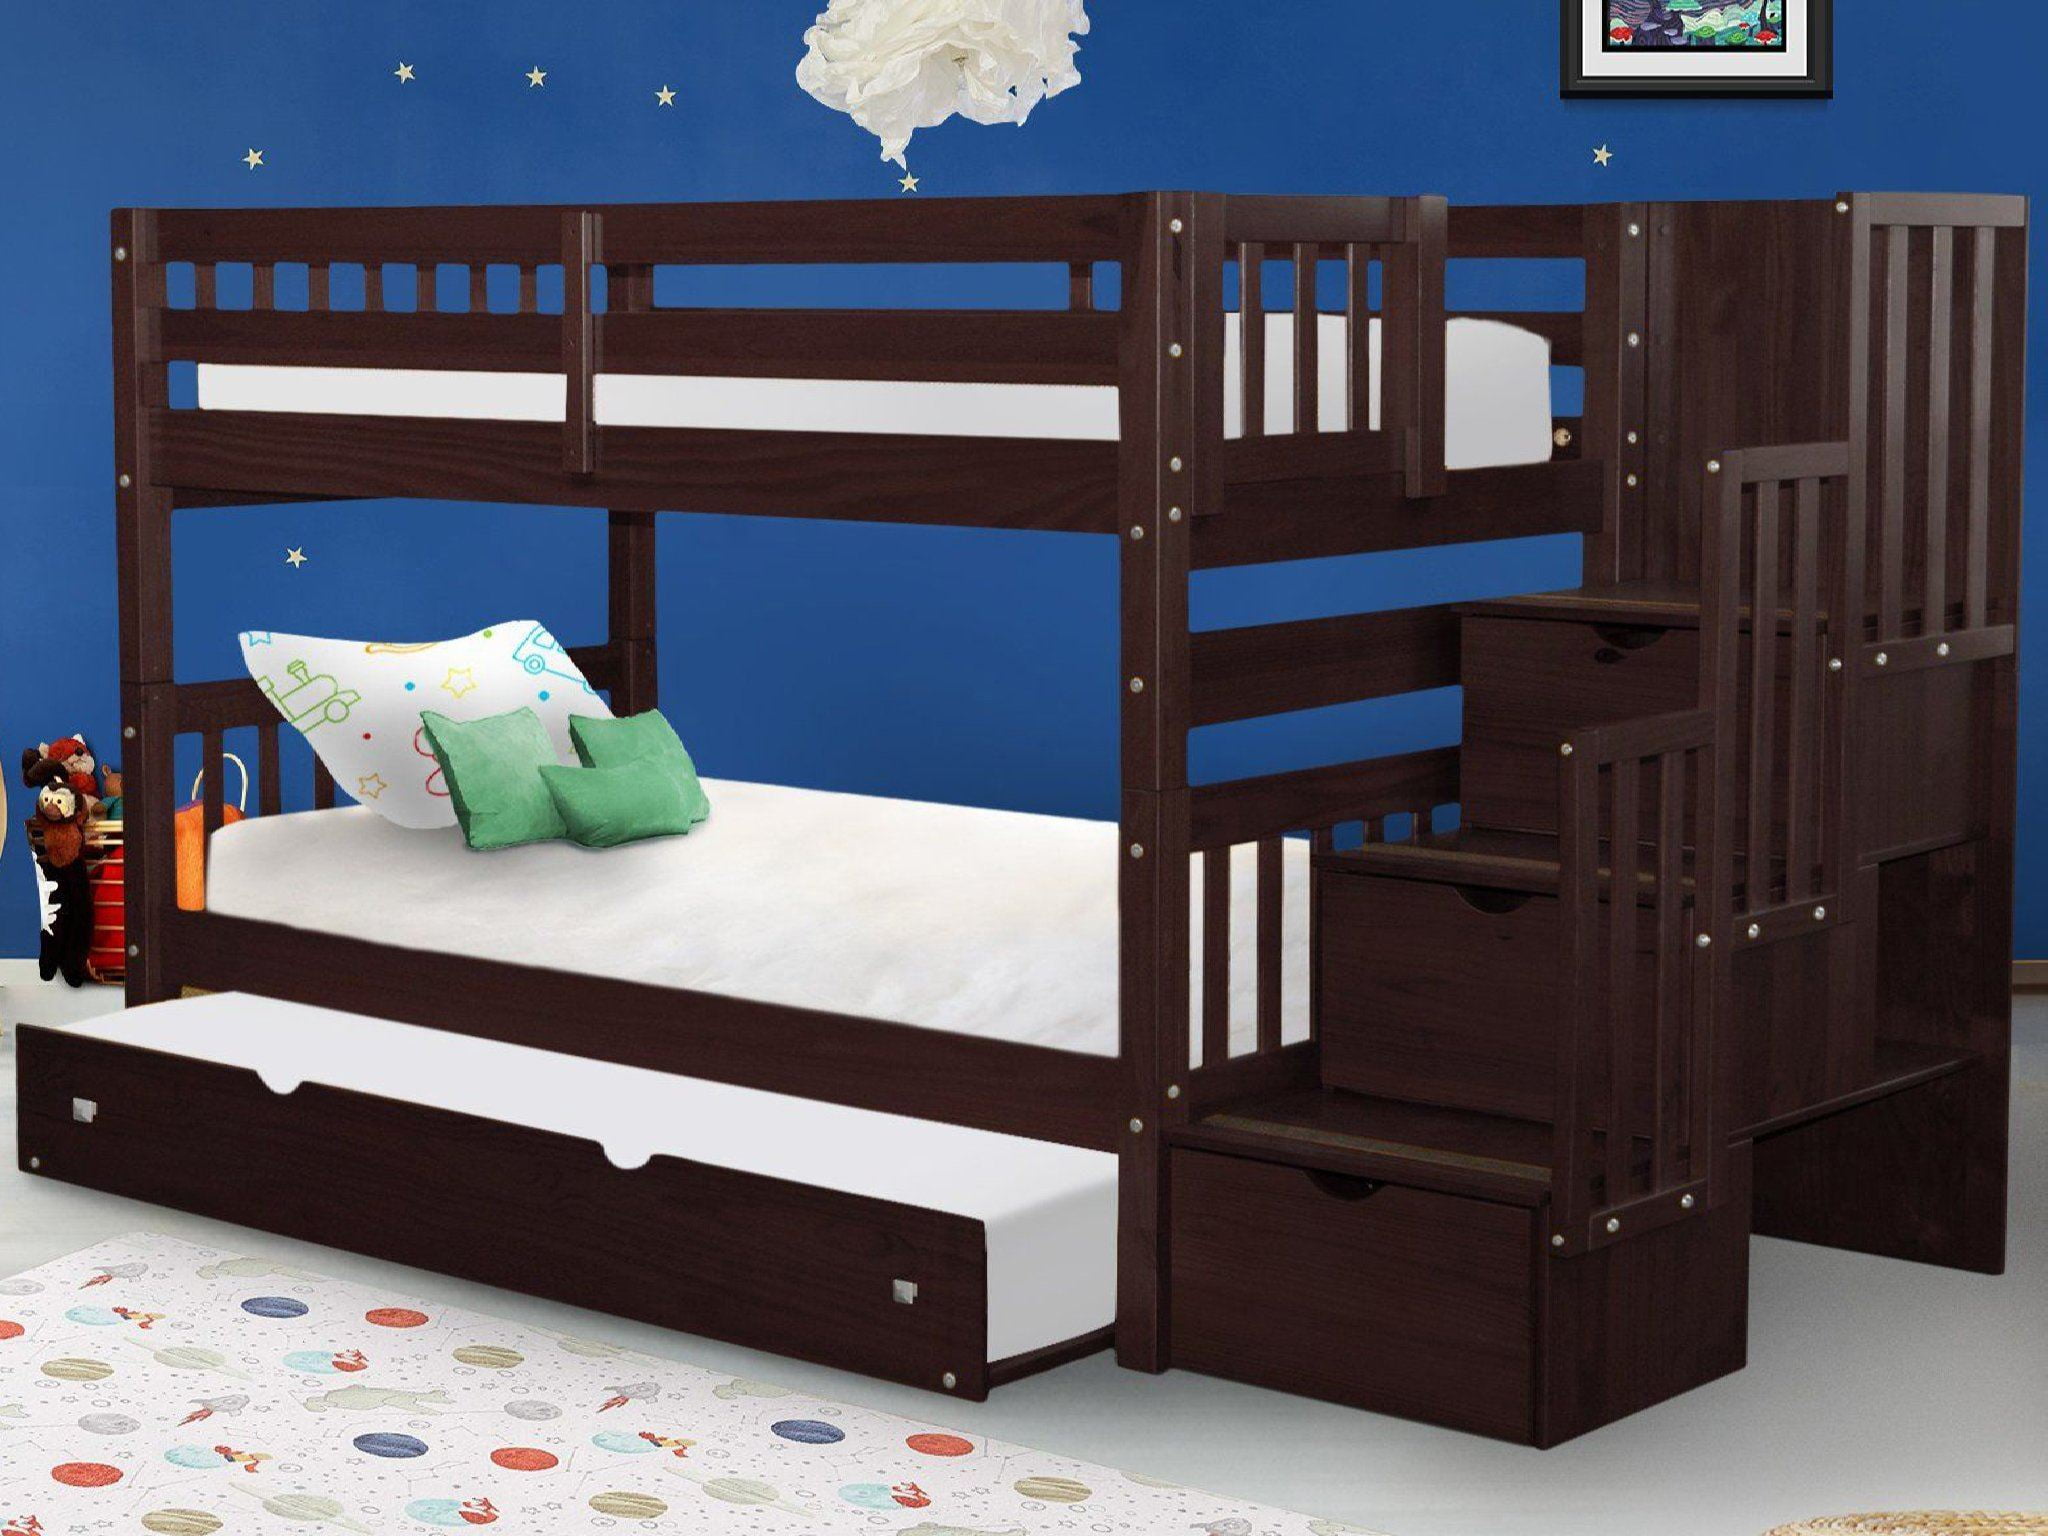 Acme Furniture Allentown Twin Over, Allentown Twin Over Twin Bunk Bed White